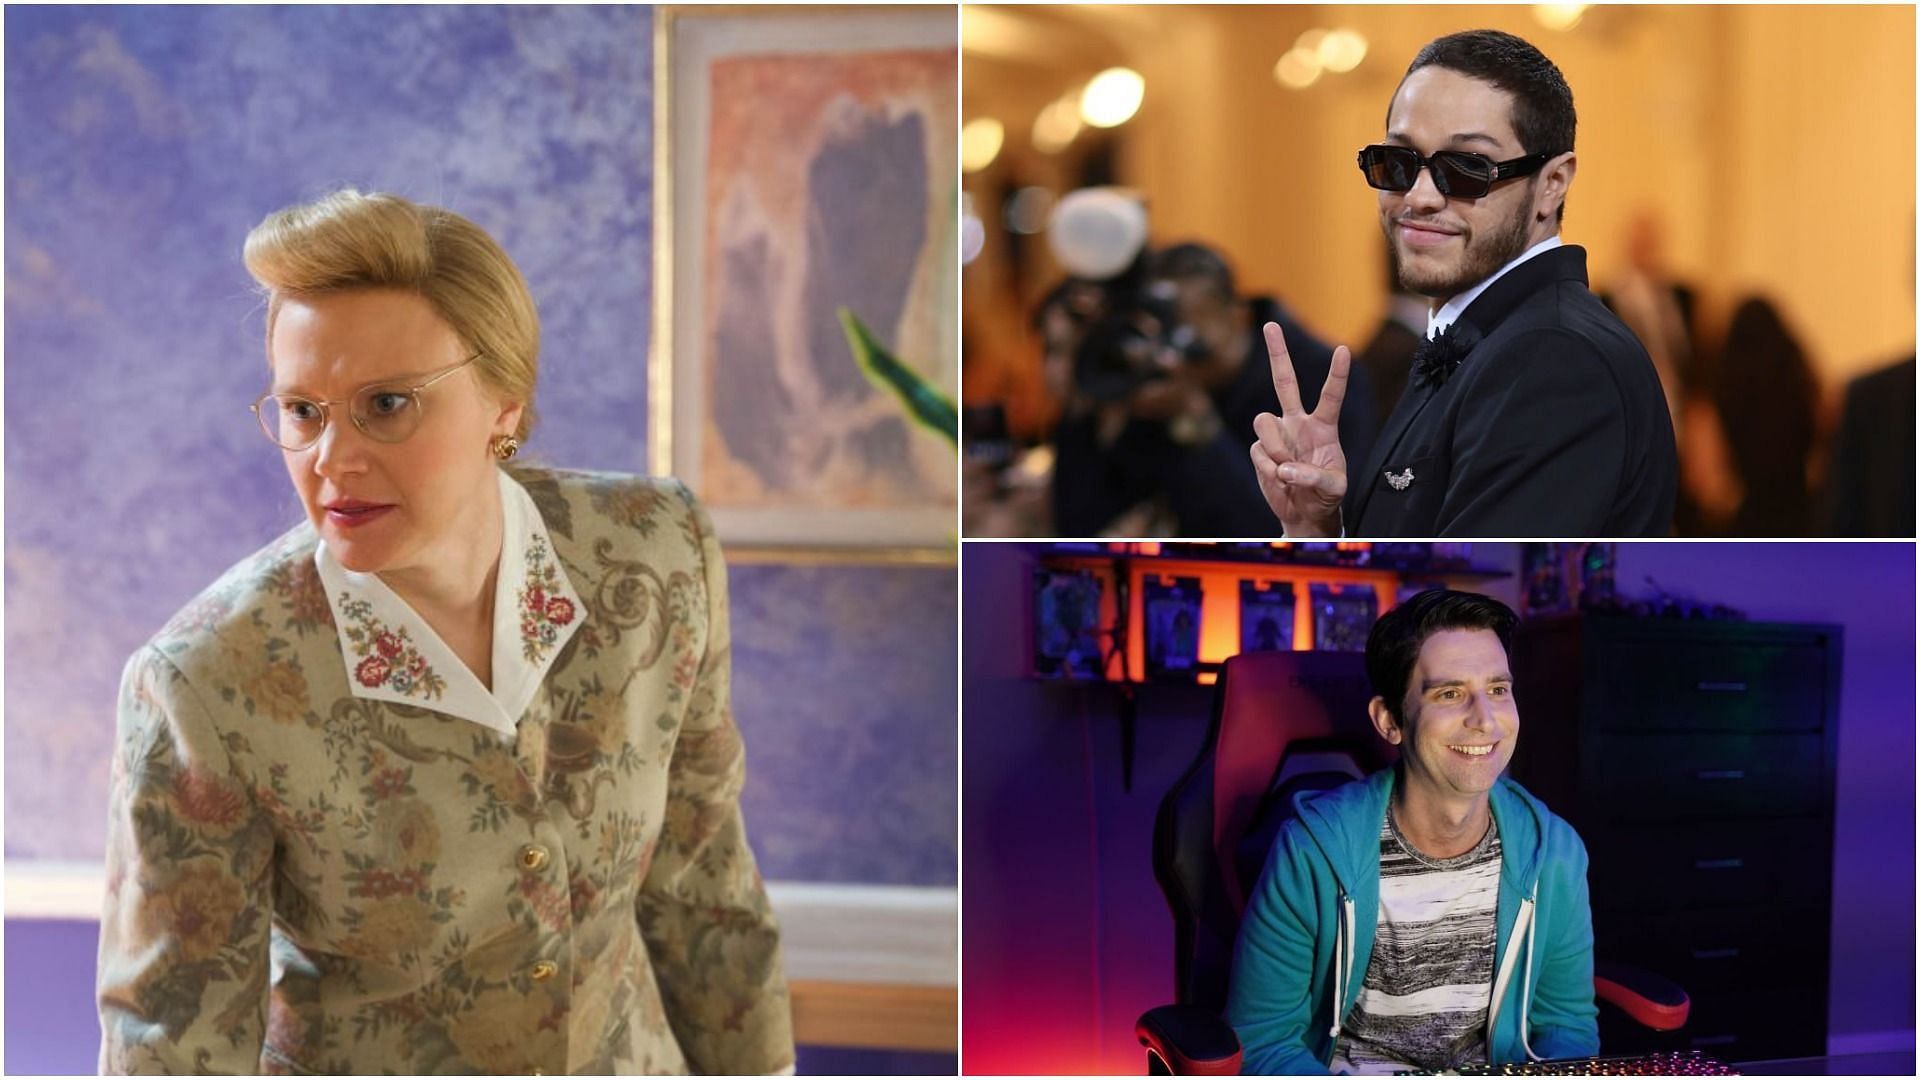 Kate McKinnon, Pete Davidson, and Kyle Mooney are also exiting SNL (Images via Kyle Dubiel and Dimitrios Kambouris/Getty Images)